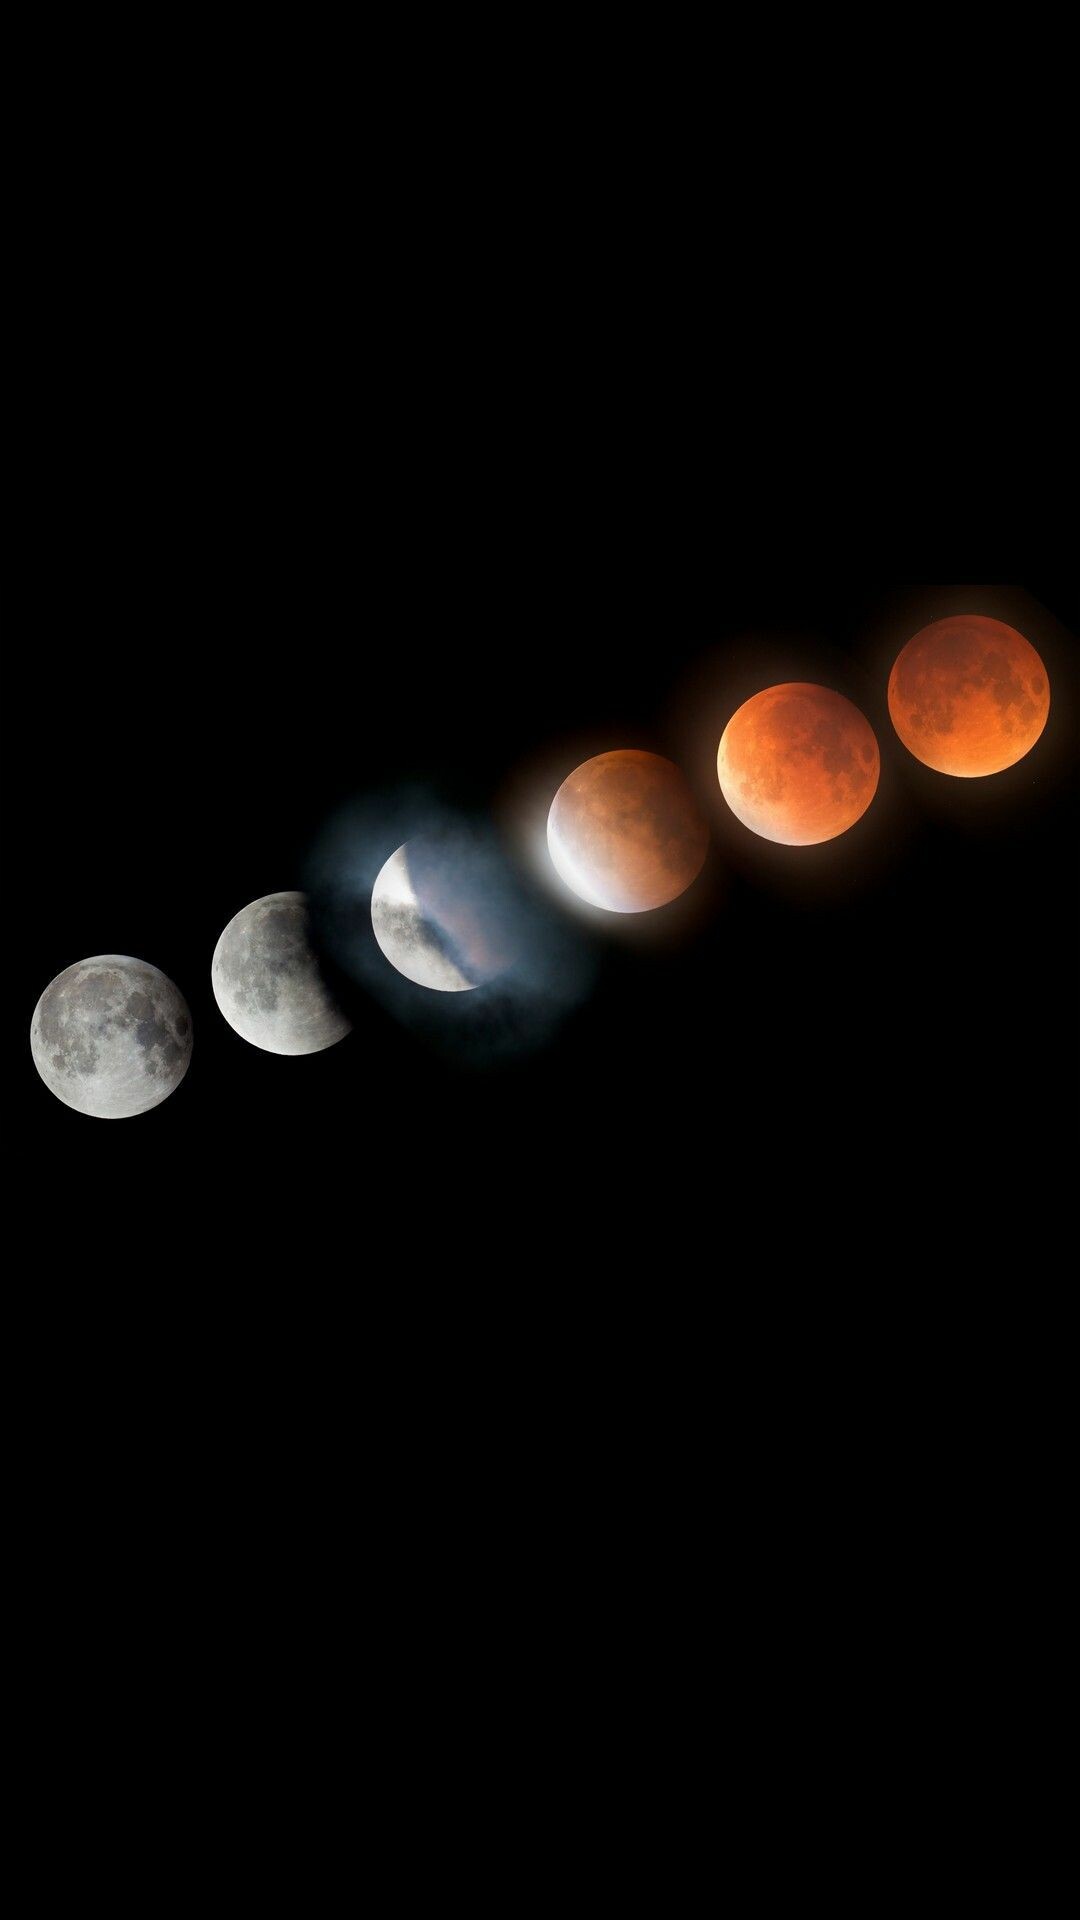 Lunar eclipse for iPhone, Celestial charm in your pocket, Night sky's marvel, Astronomical wonder, 1080x1920 Full HD Phone